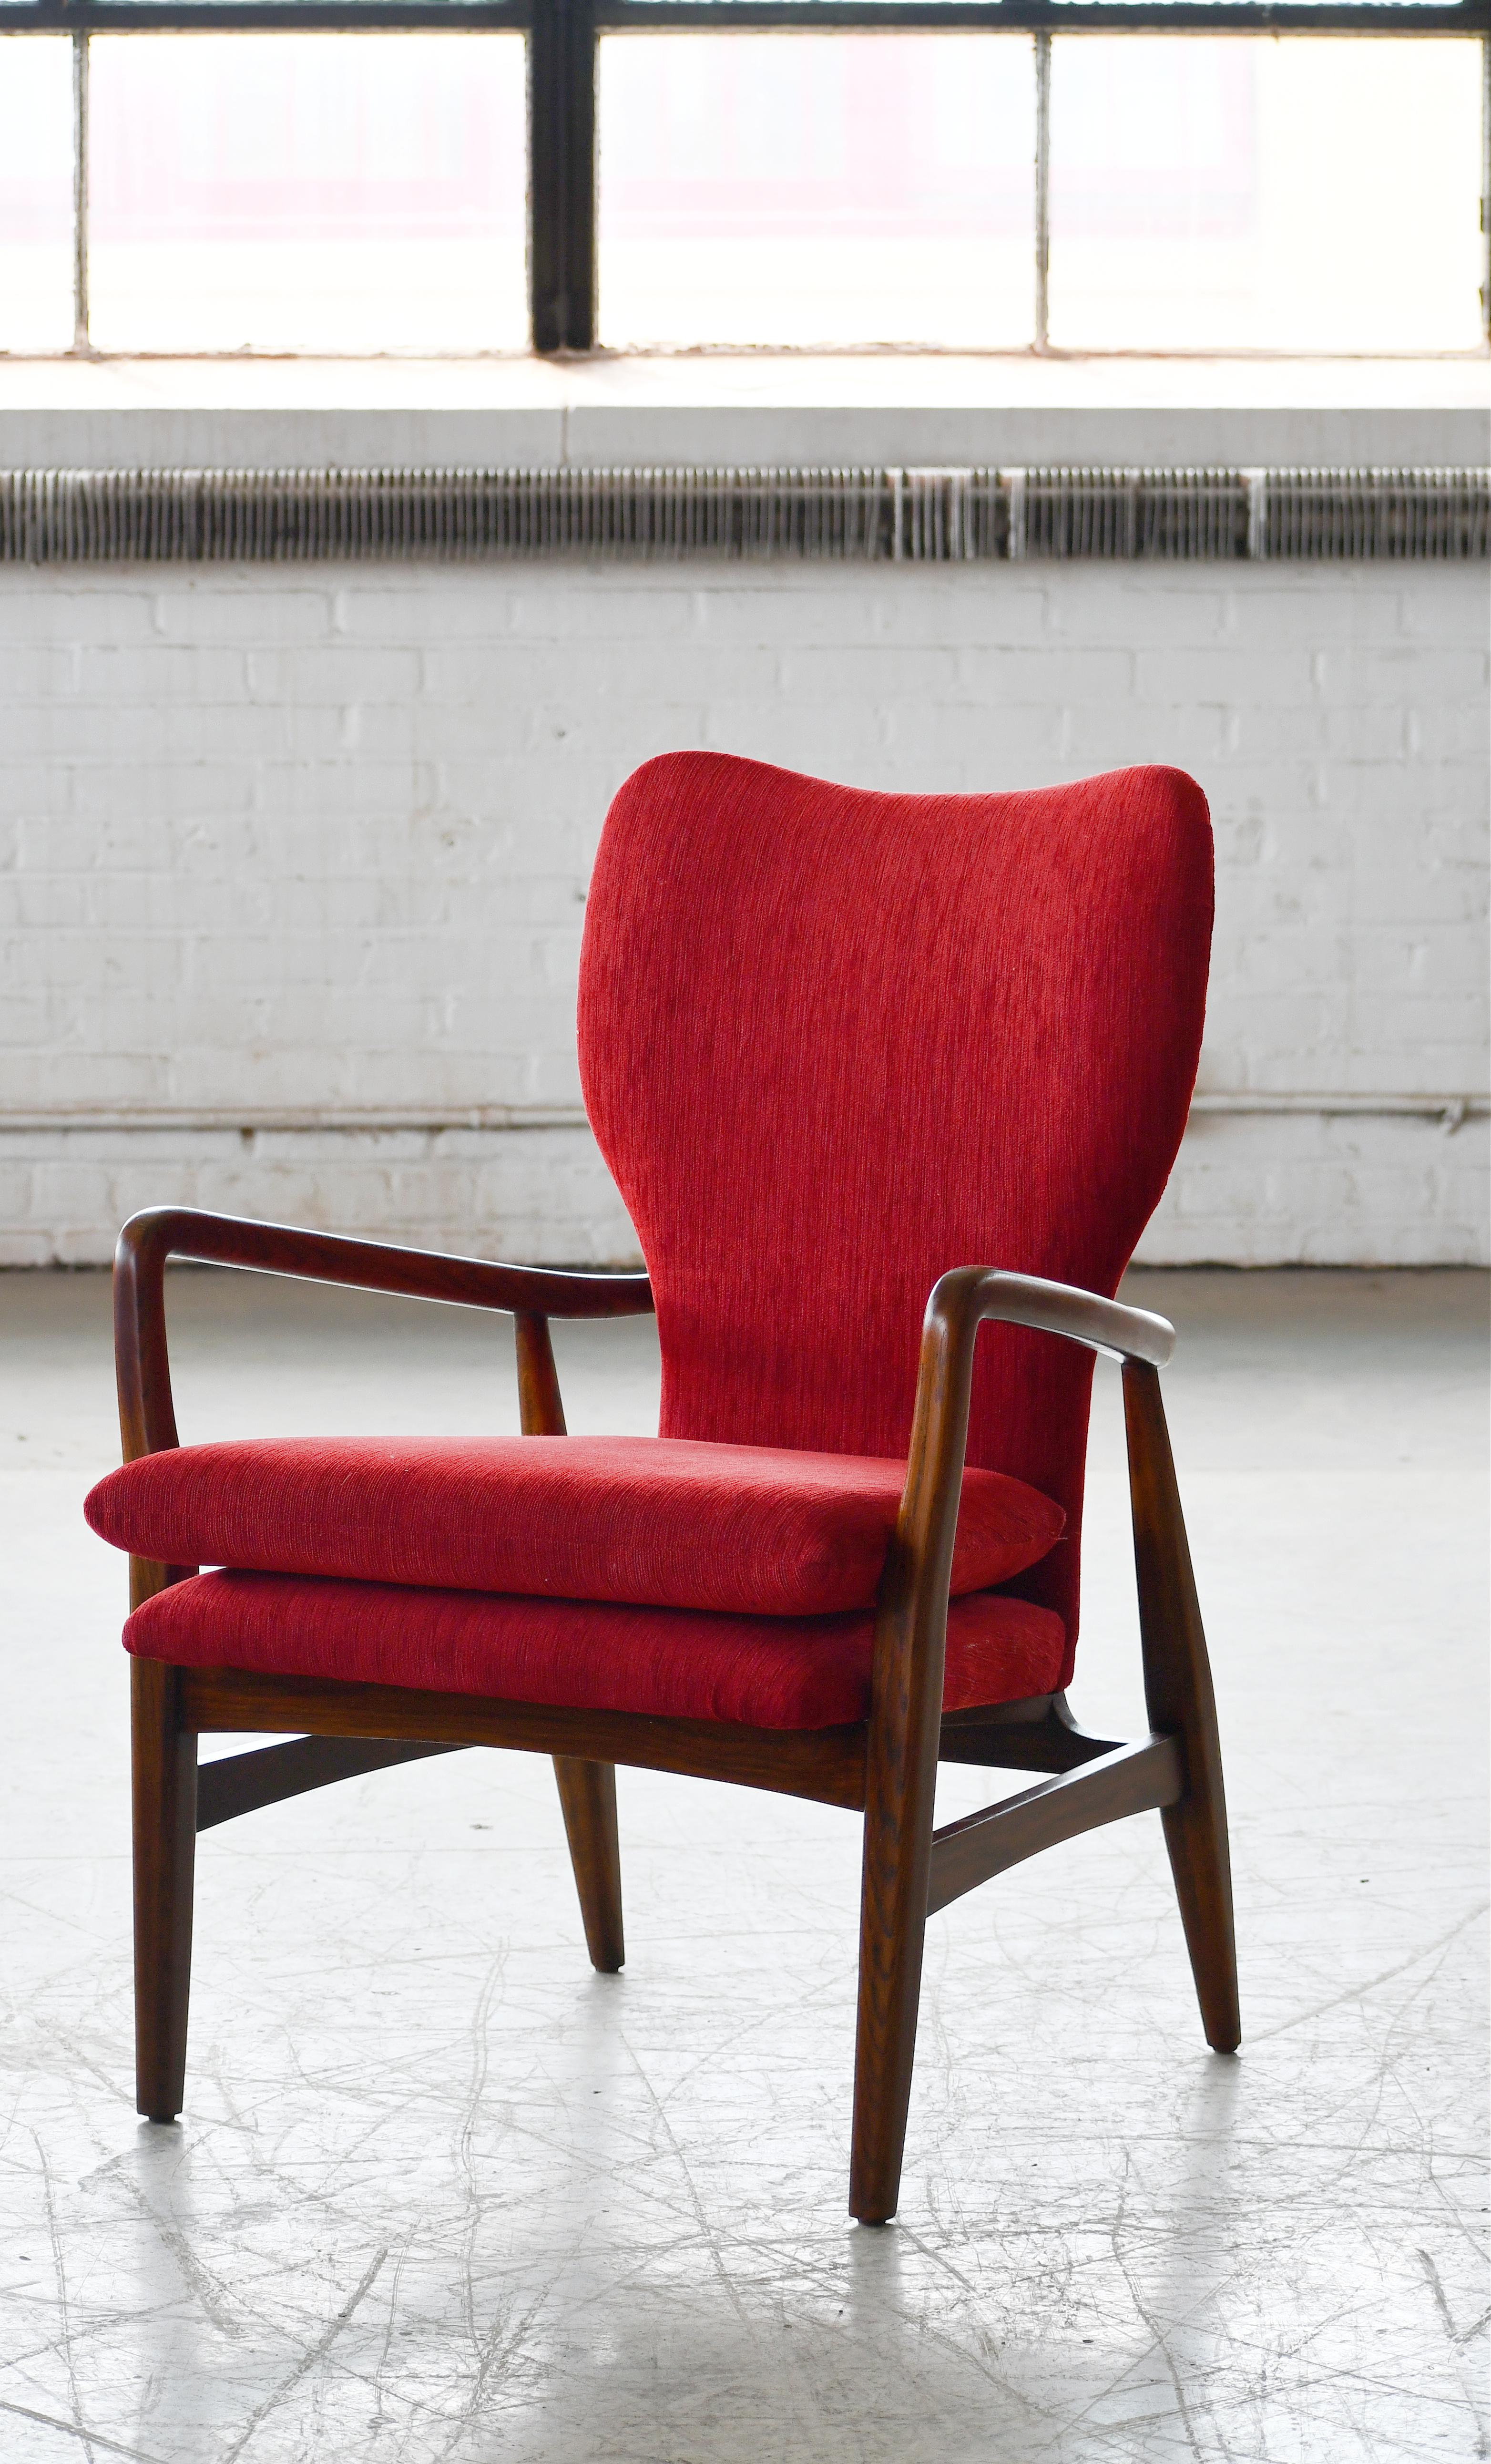 Danish very elegant and sculptural looking chair from around 1950. Upholstered at a later point in red wool. The oak frame has taken on a teak color over the years and stands out with very nice color and grain. 